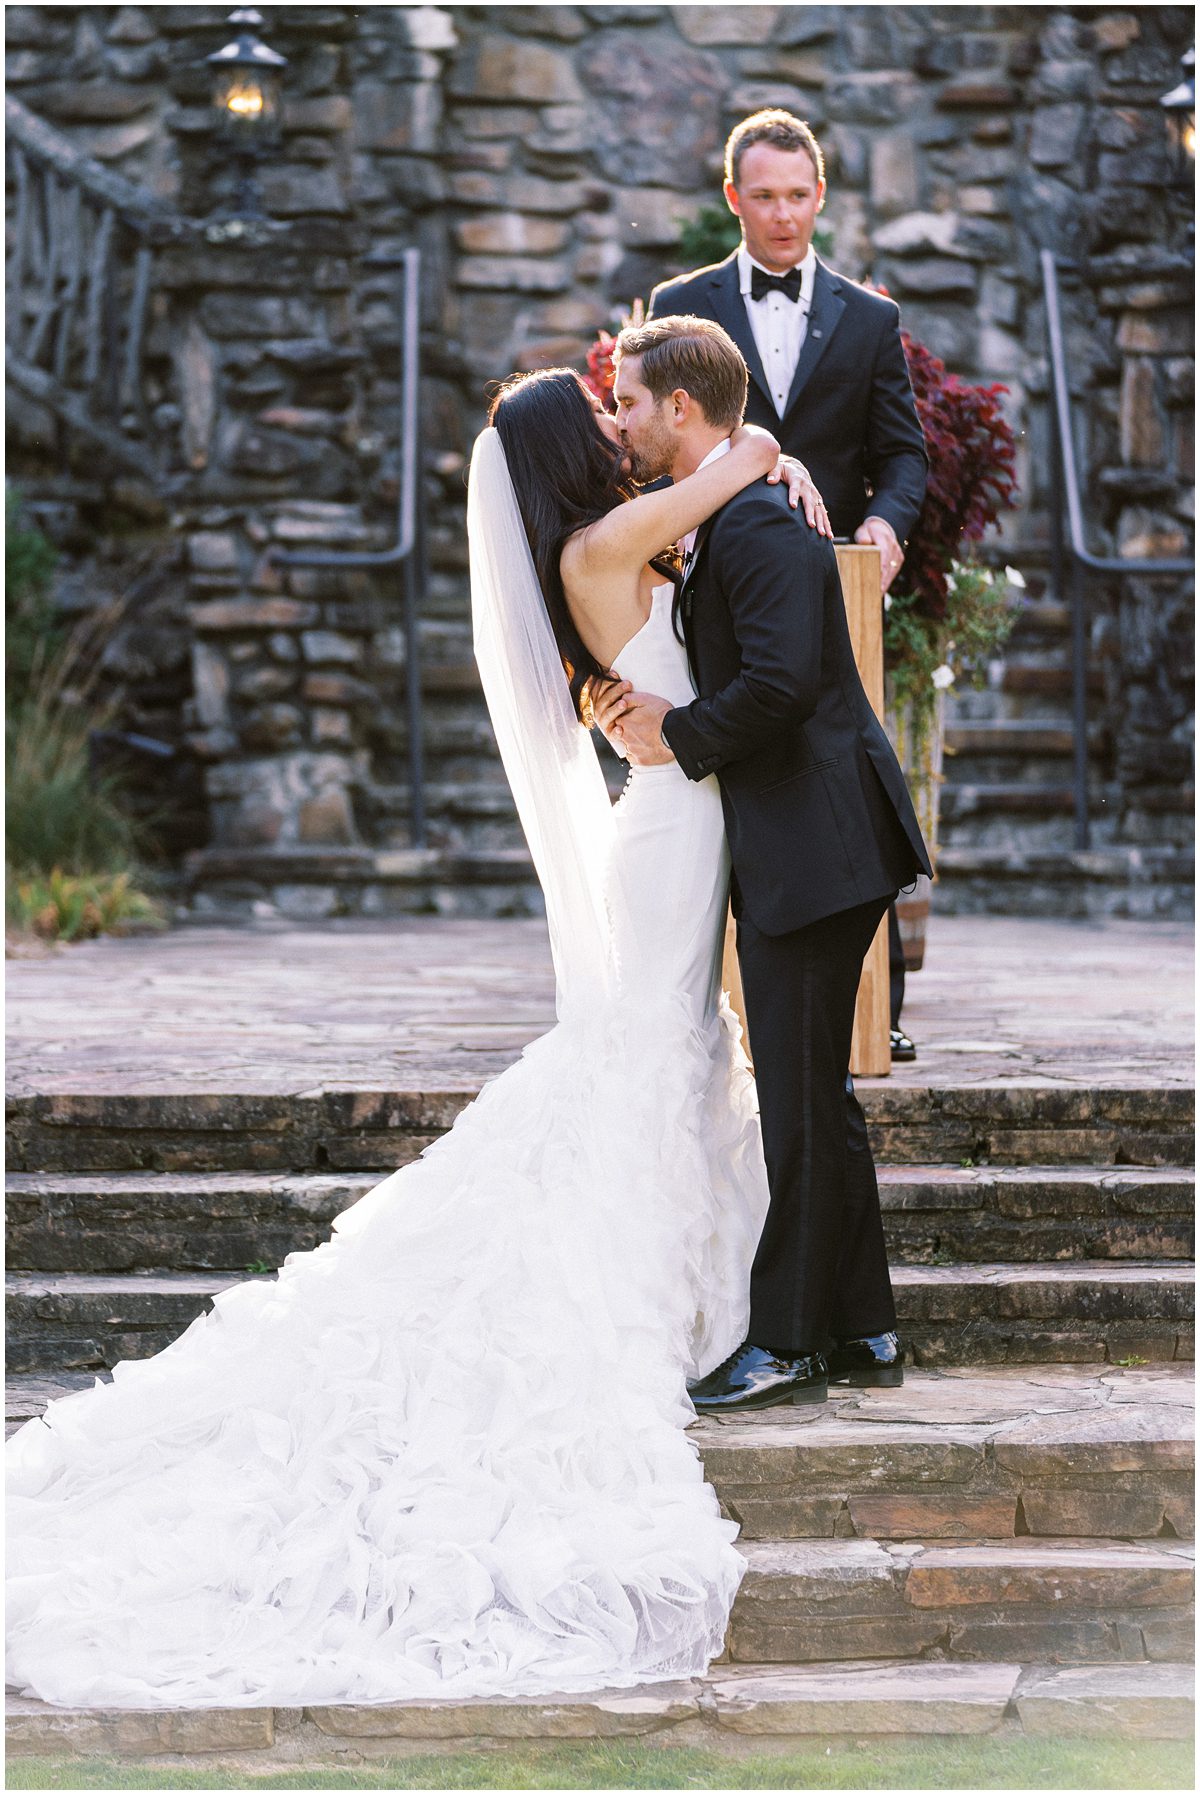 The bride and grooms first kiss at their Mountaintop Golf and Lake Club wedding in Highlands NC